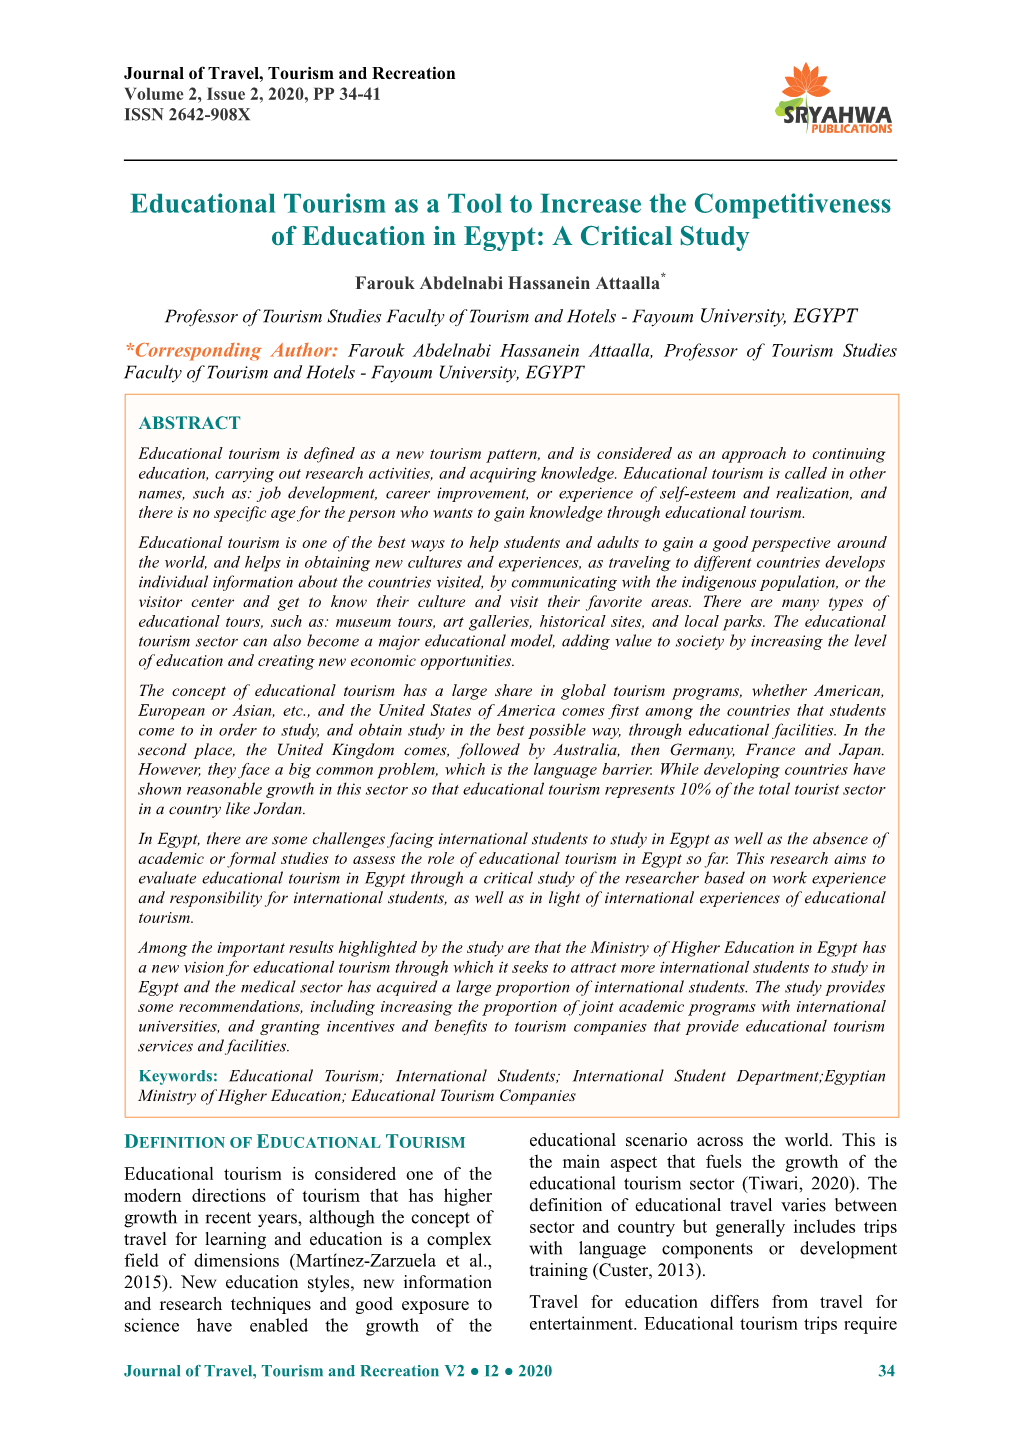 Educational Tourism As a Tool to Increase the Competitiveness of Education in Egypt: a Critical Study